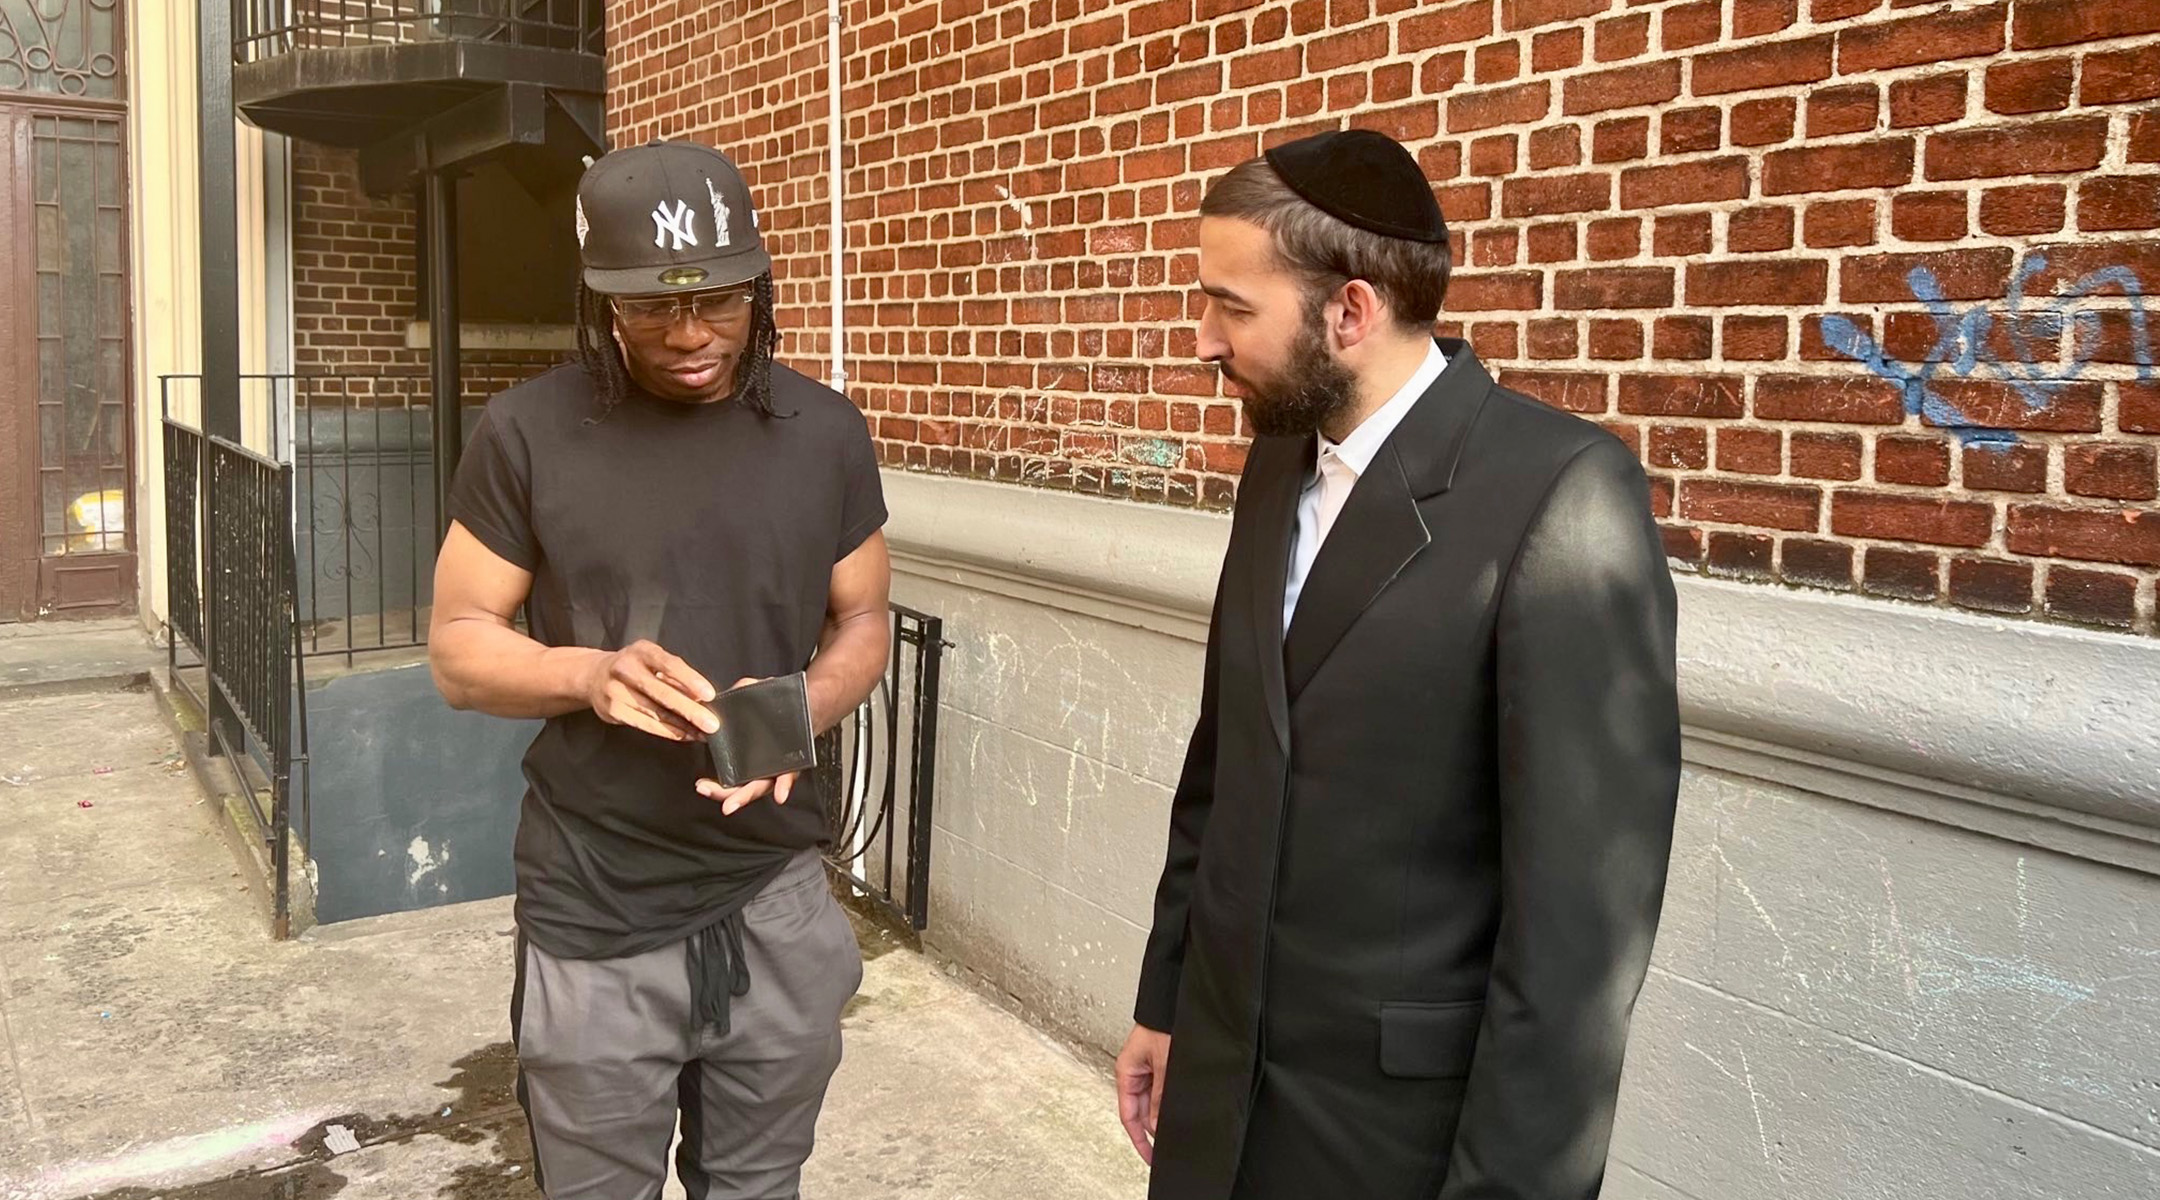 Bronx man who lost his wallet and $1,400 is grateful to Hasidic family who returned it